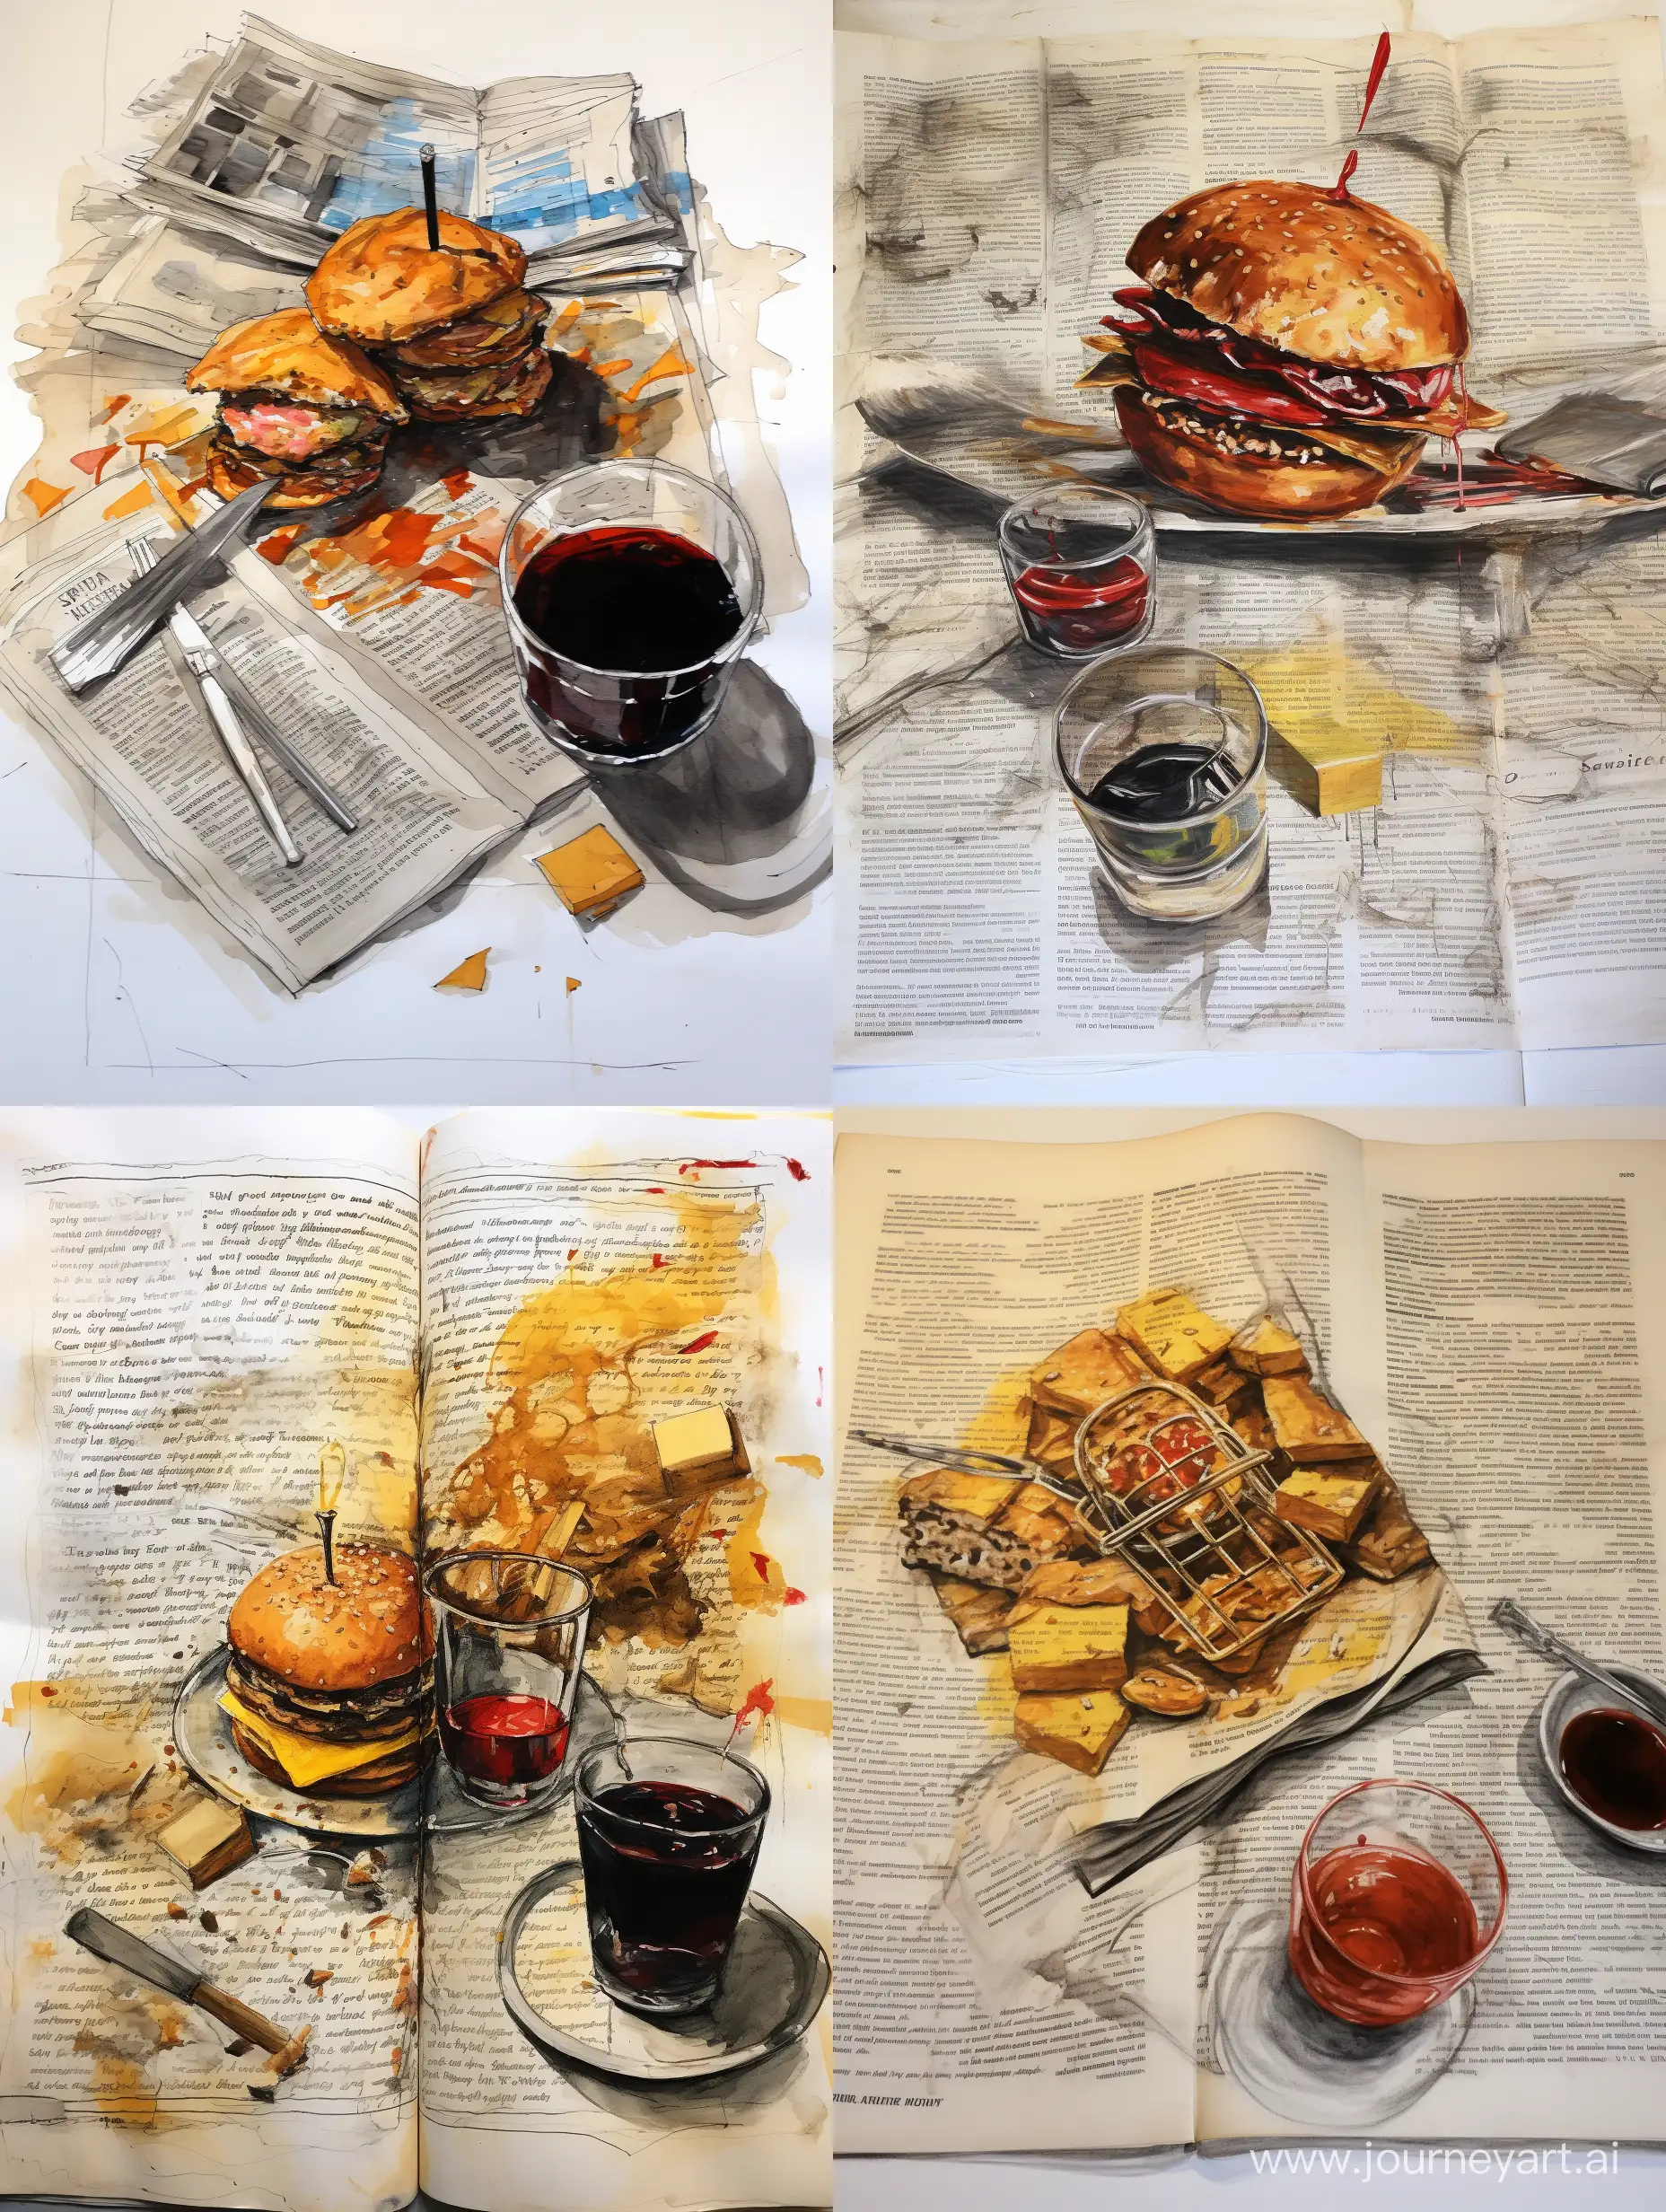 half of burger, one whiskey tumbler, pages of a manuscript, cigarettes, ashes, mustard spilled, ketchup smeared, potato chips and fries on a side, view from above, no background, steadman's style in ink, erratic